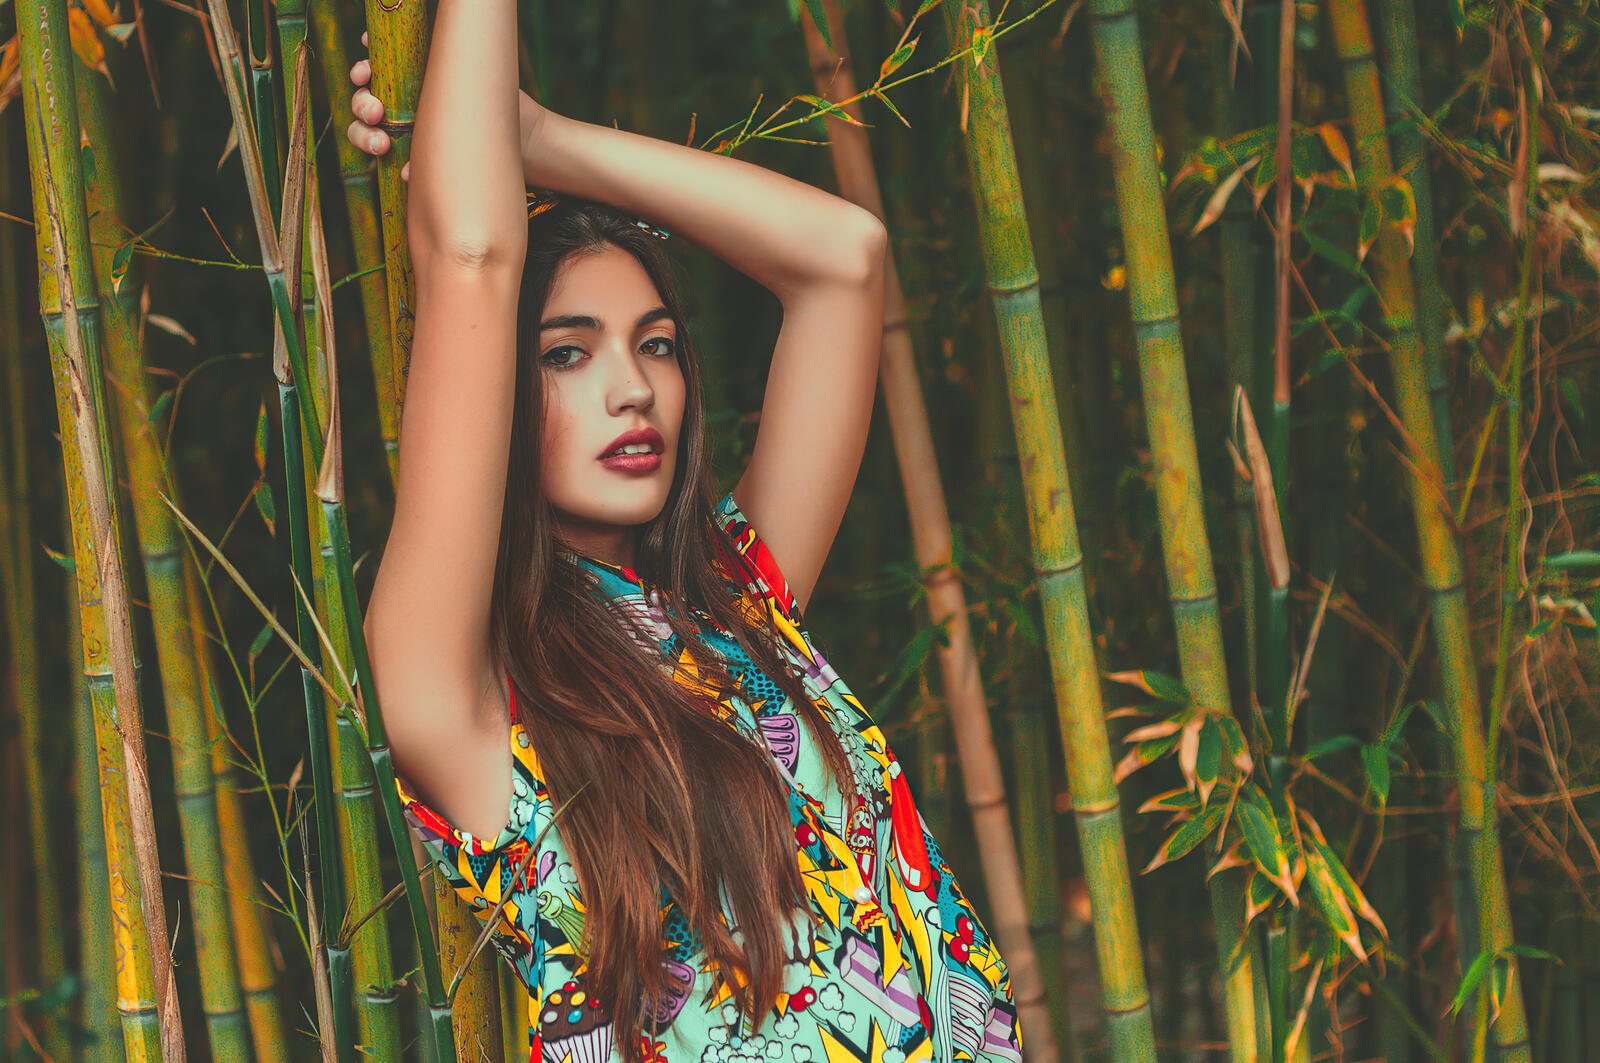 Free photo Paula Riba poses in a colorful dress against a background of bamboo